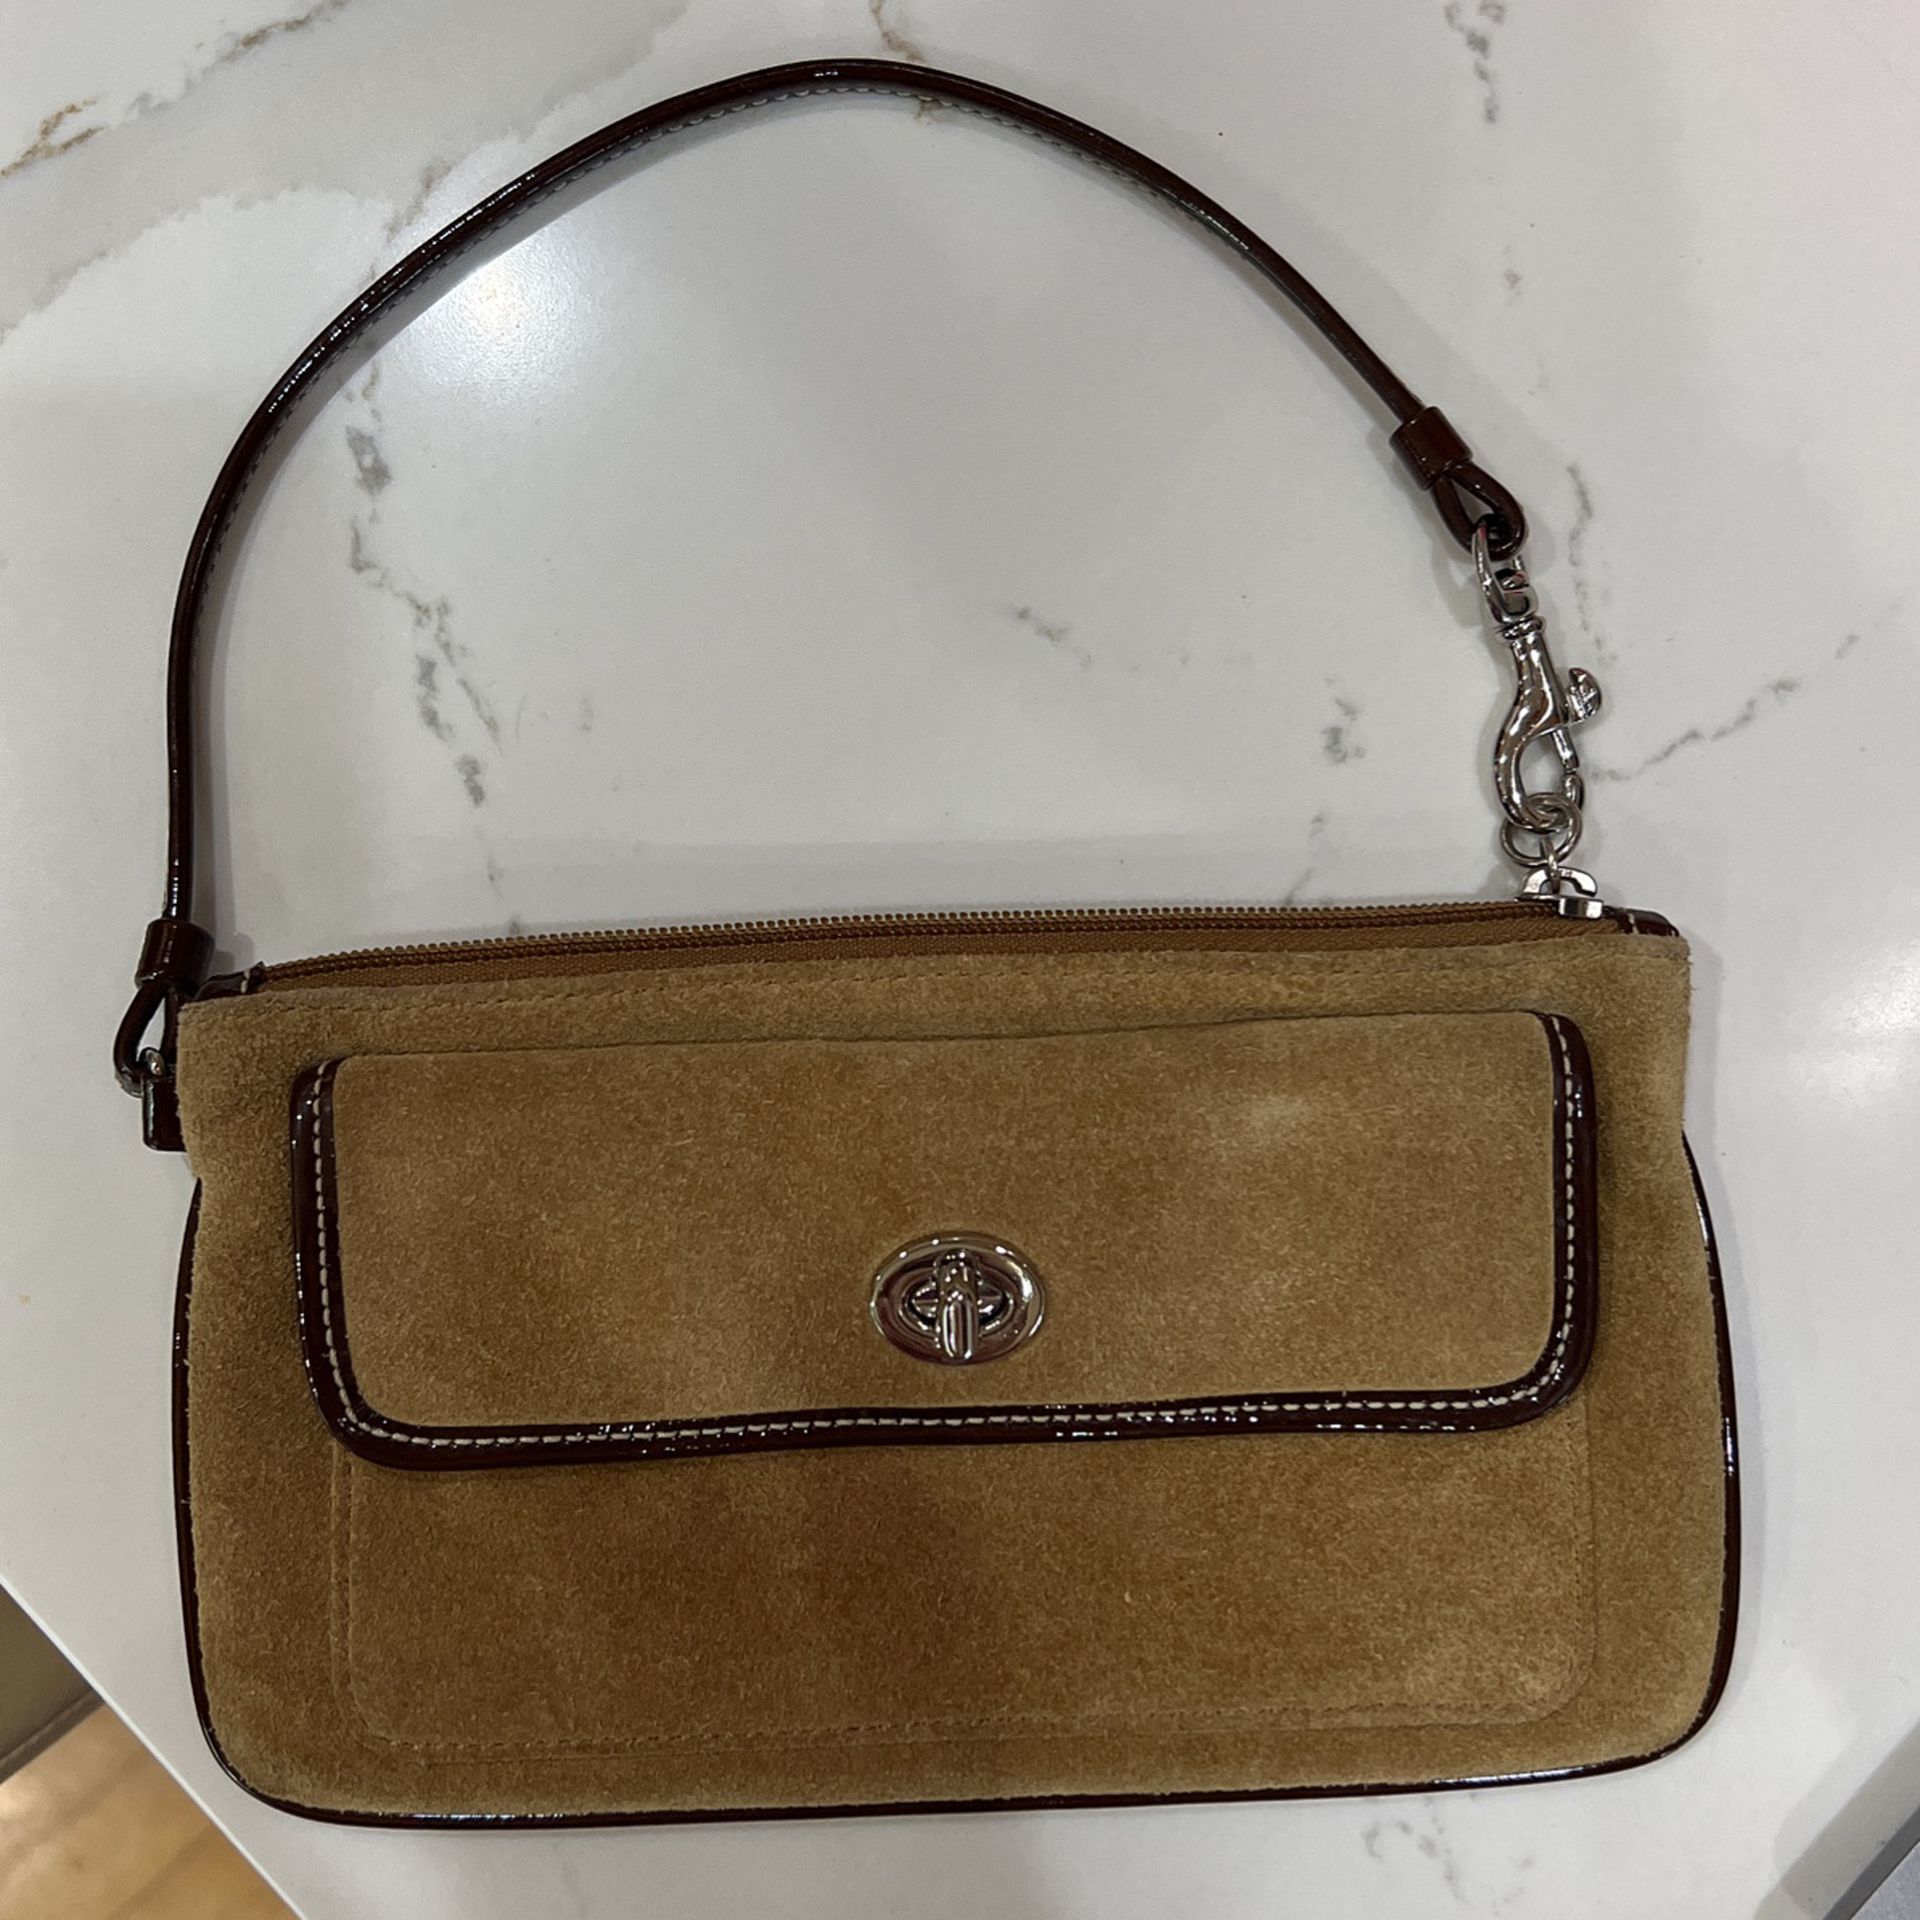 Brown suede wristlet with brown patent leather trim  turn lock pocket. Coach